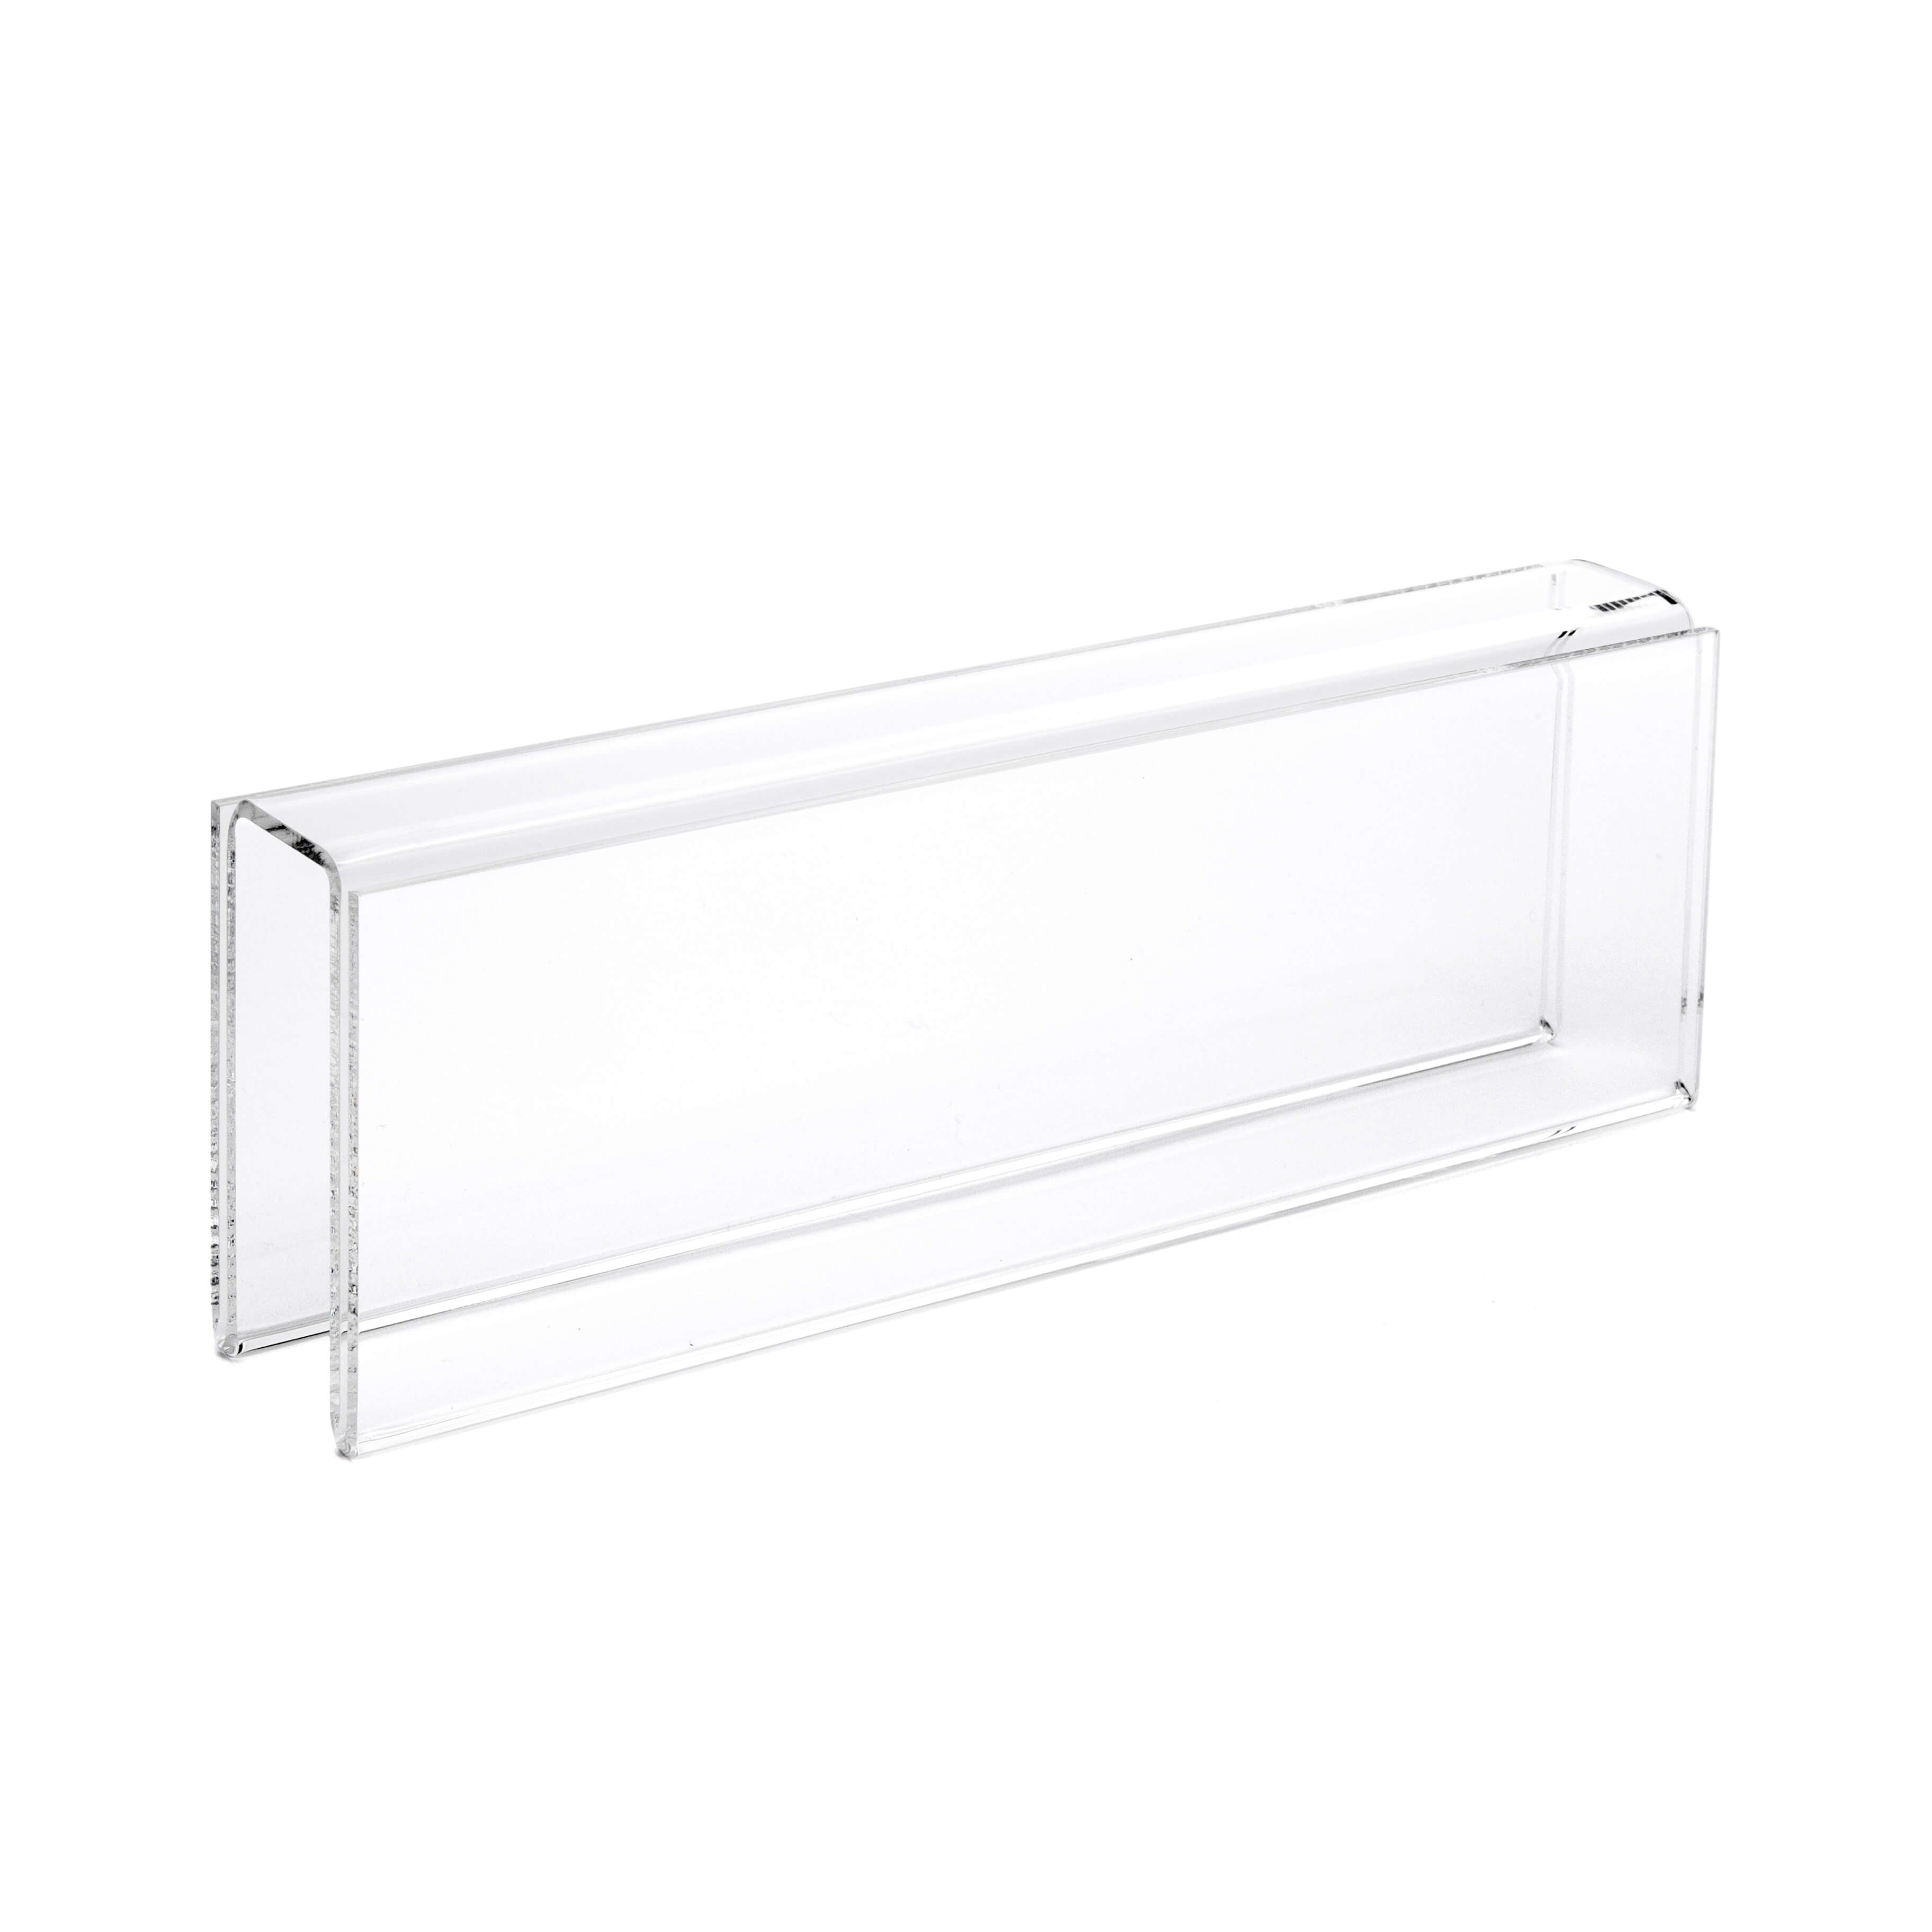 Acrylic Cubicle Partition Frame - Name Tag Wizard